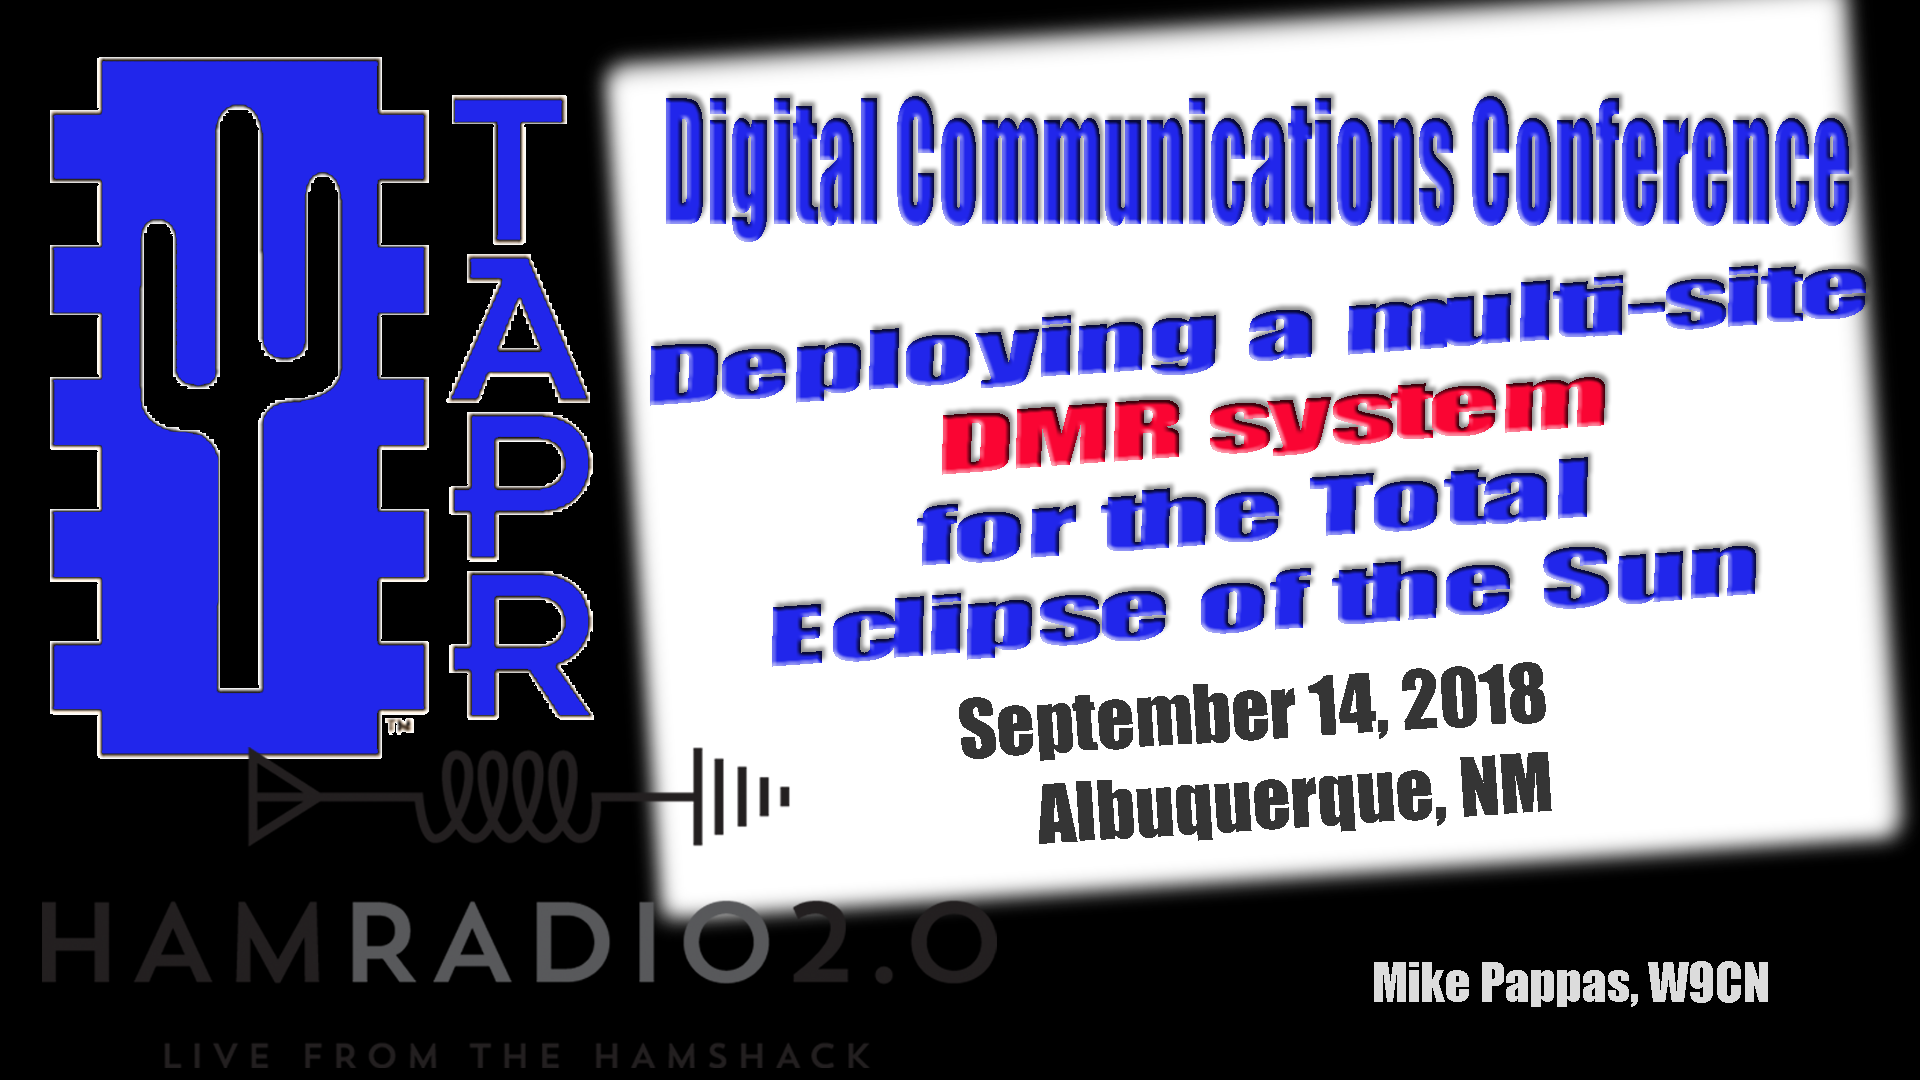 Episode 154: The 2017 Eclipse Multi-Site DMR System